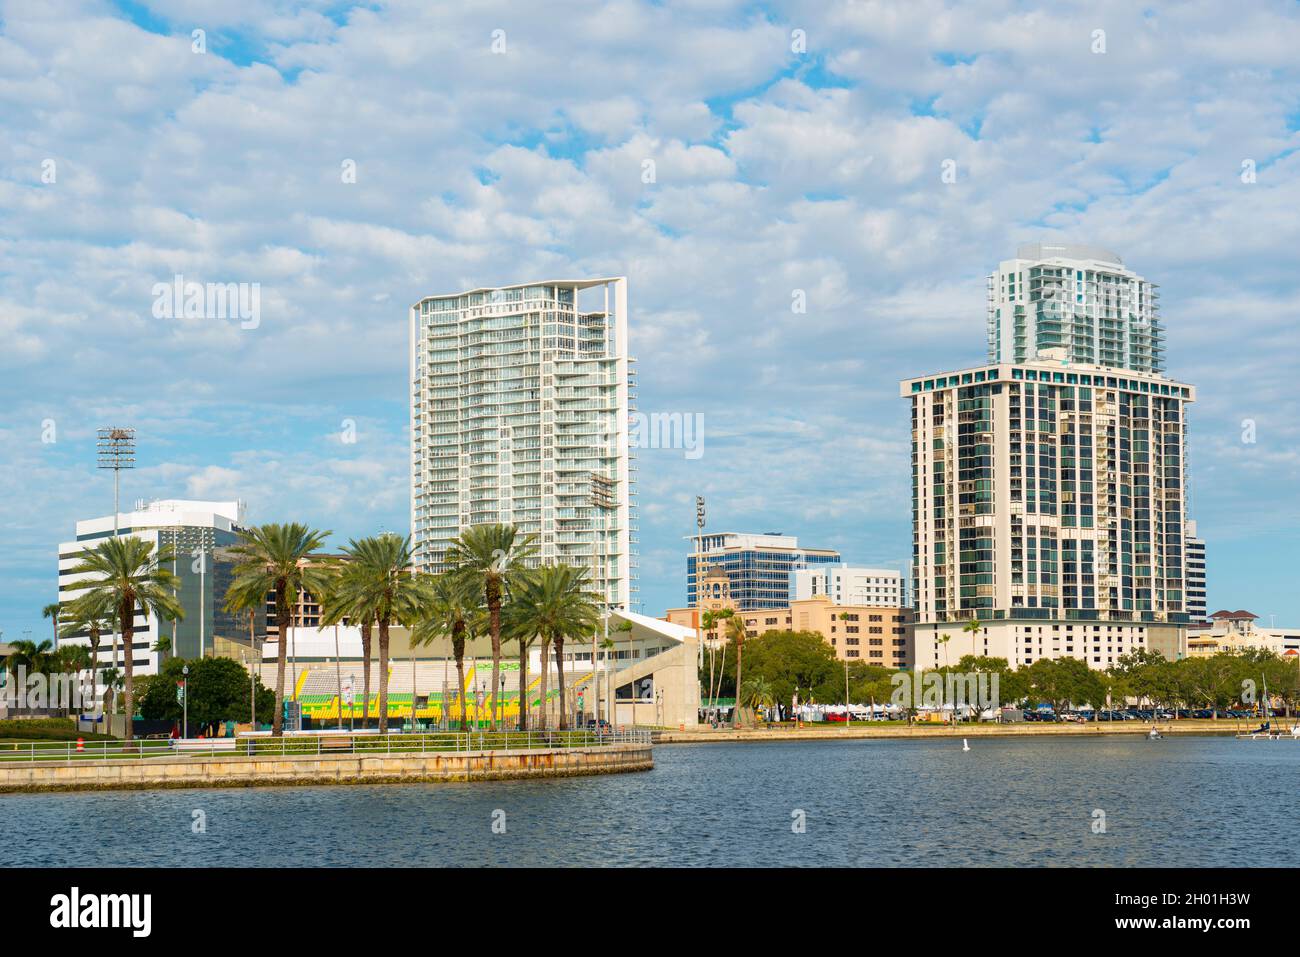 Modern city skyline including Signature Place, Bayfront Tower and One St. Petersburg from Dan Wheldon Way in downtown St. Petersburg, Florida FL, USA. Stock Photo